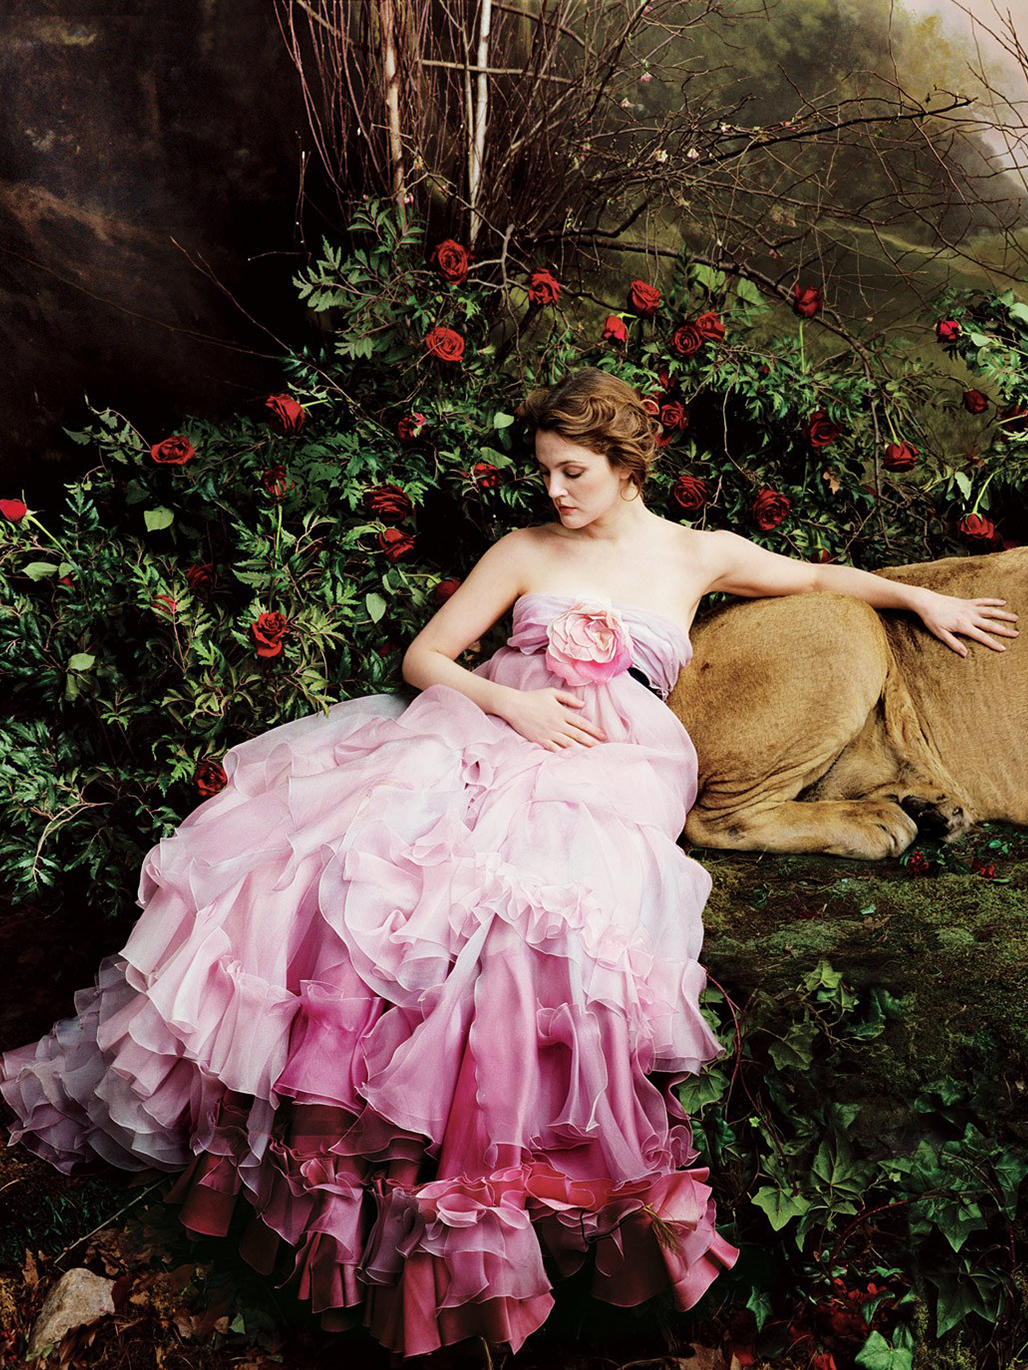 39 Lolas: Drew Barrymore by Annie Leibovitz for Vogue US April 2005